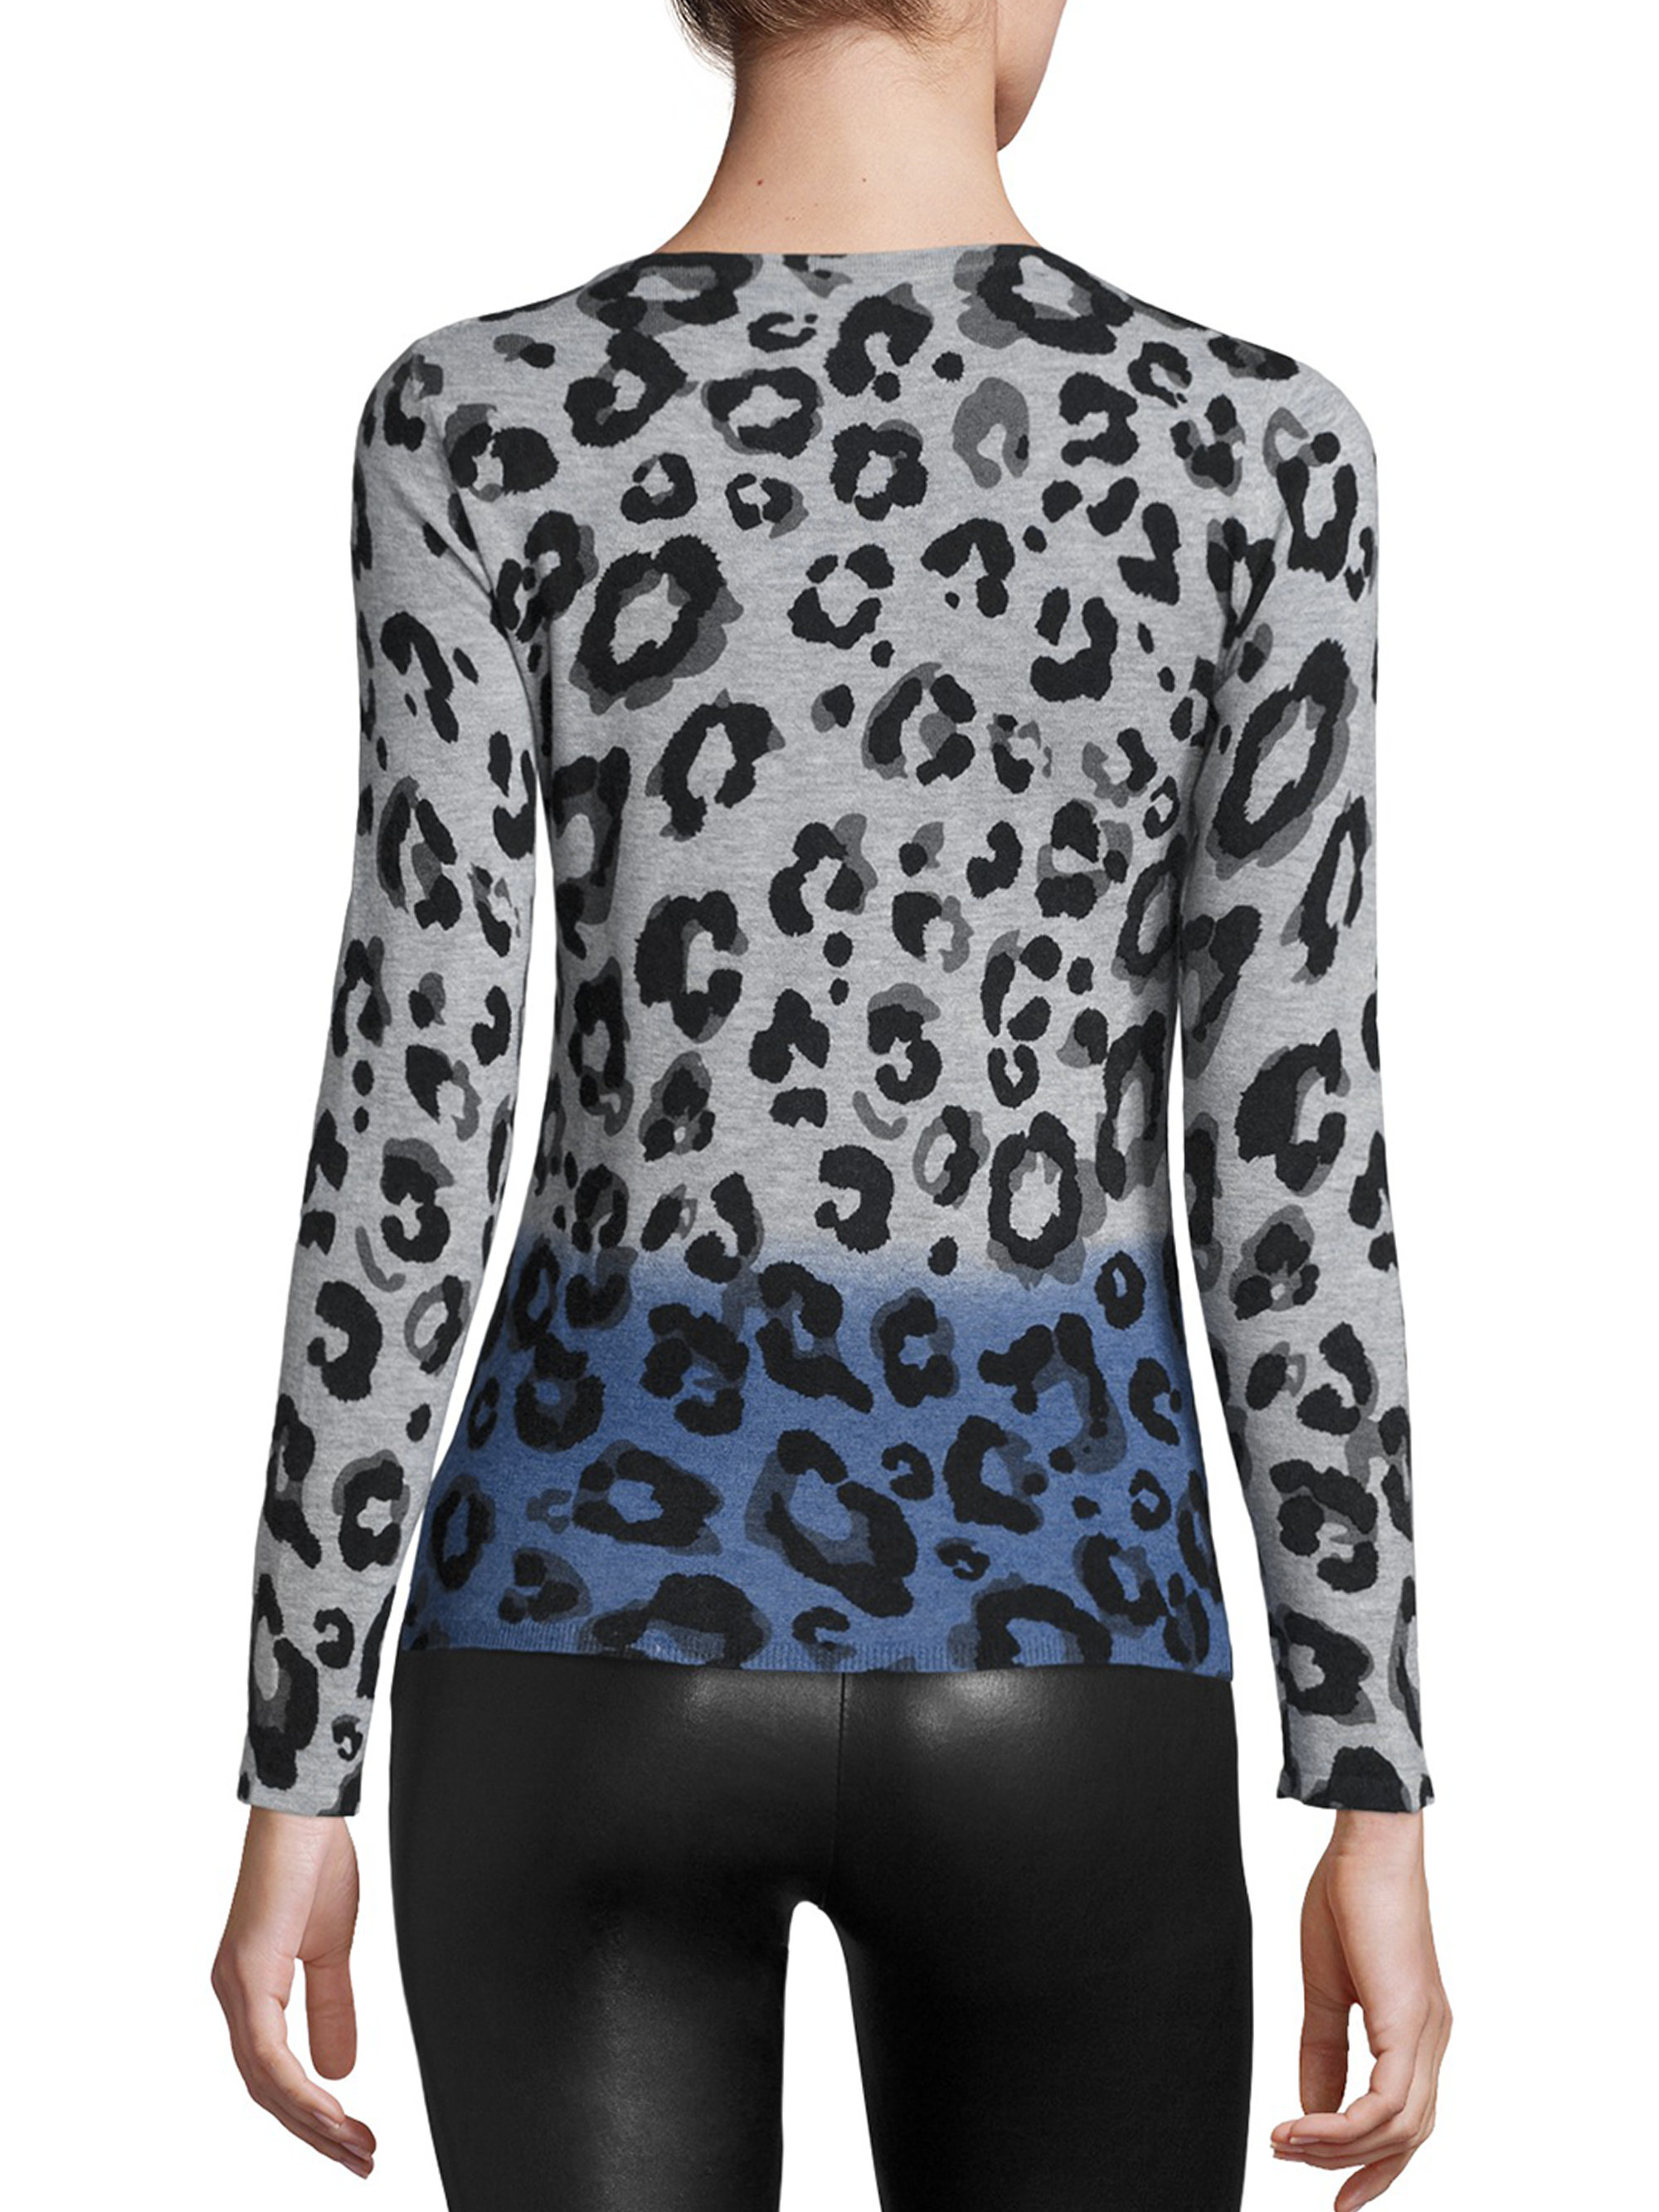 Lyst - Saks fifth avenue Cashmere Two-tone Leopard-print Sweater in Blue